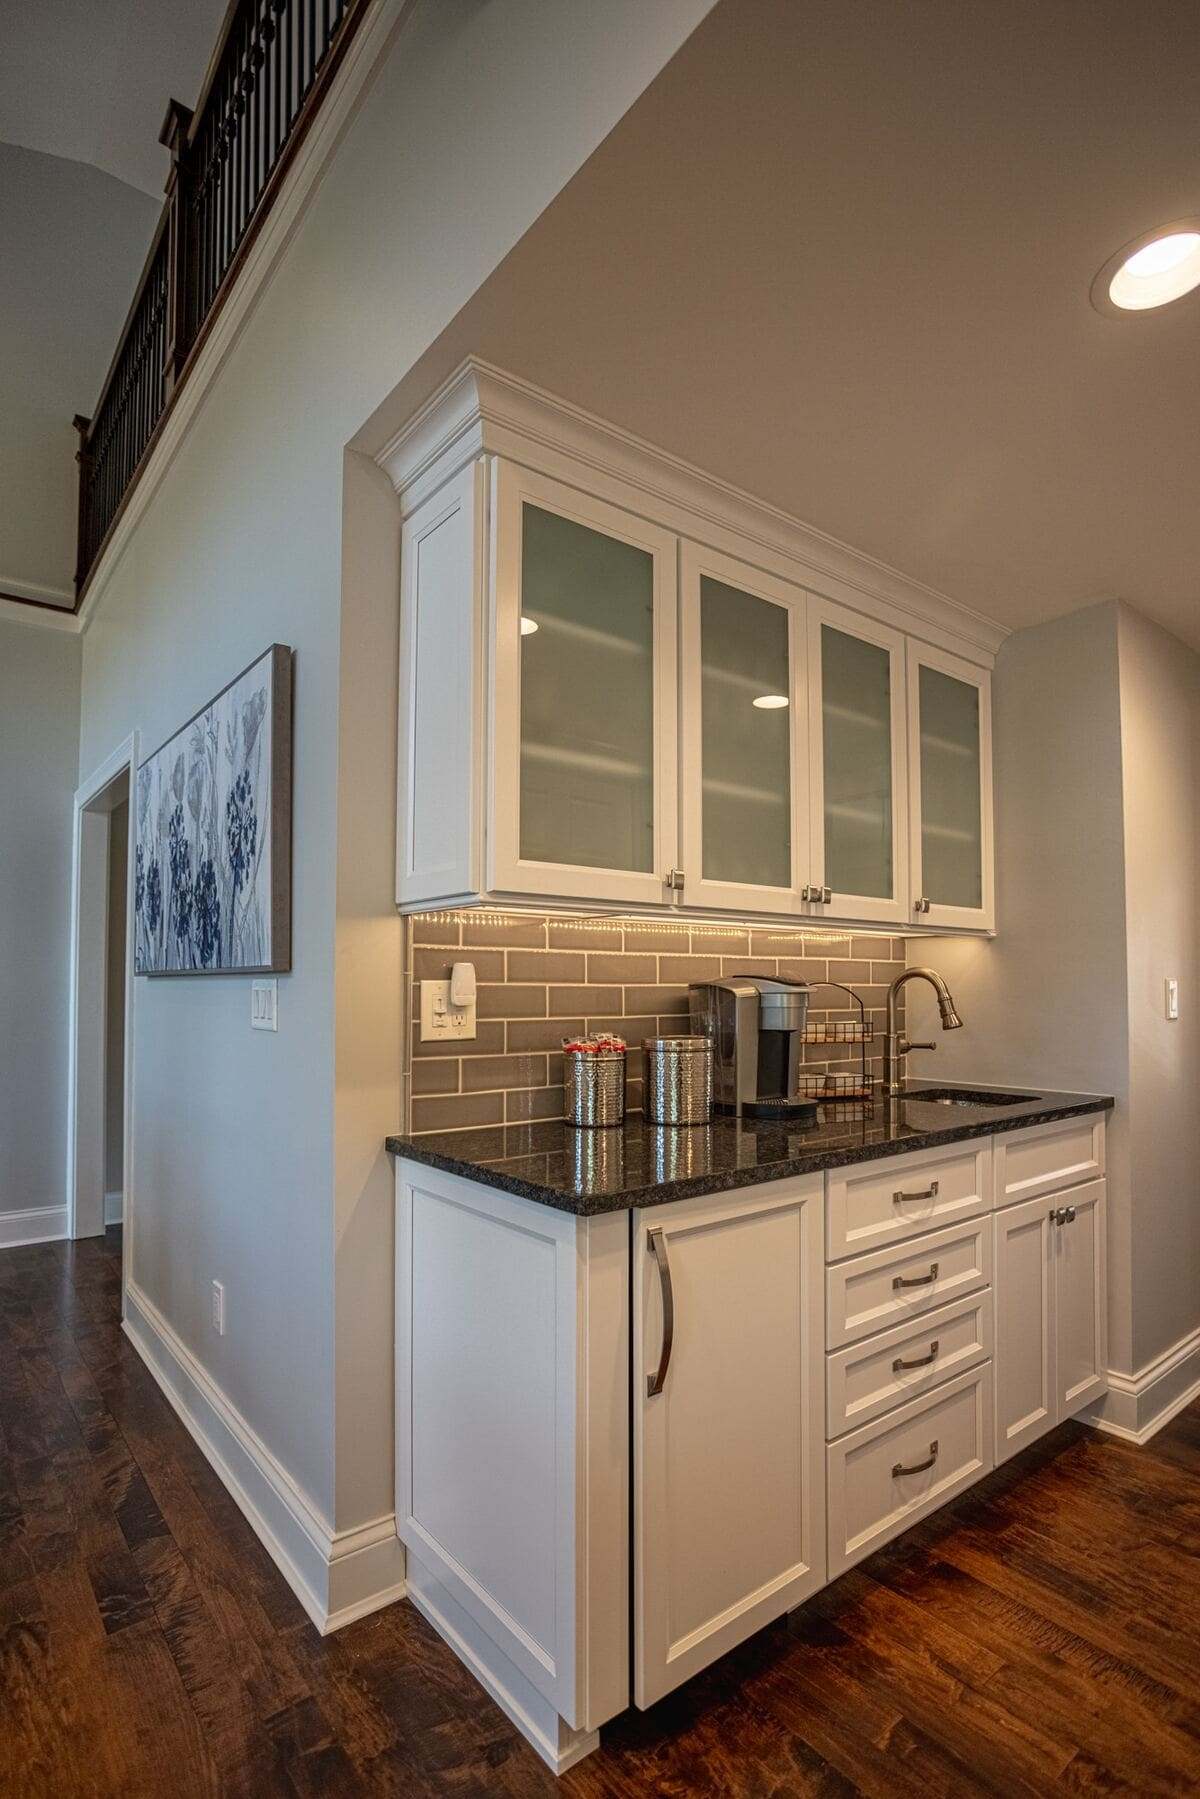 Custom beverage station and coffee bar with frosted window cabinets above